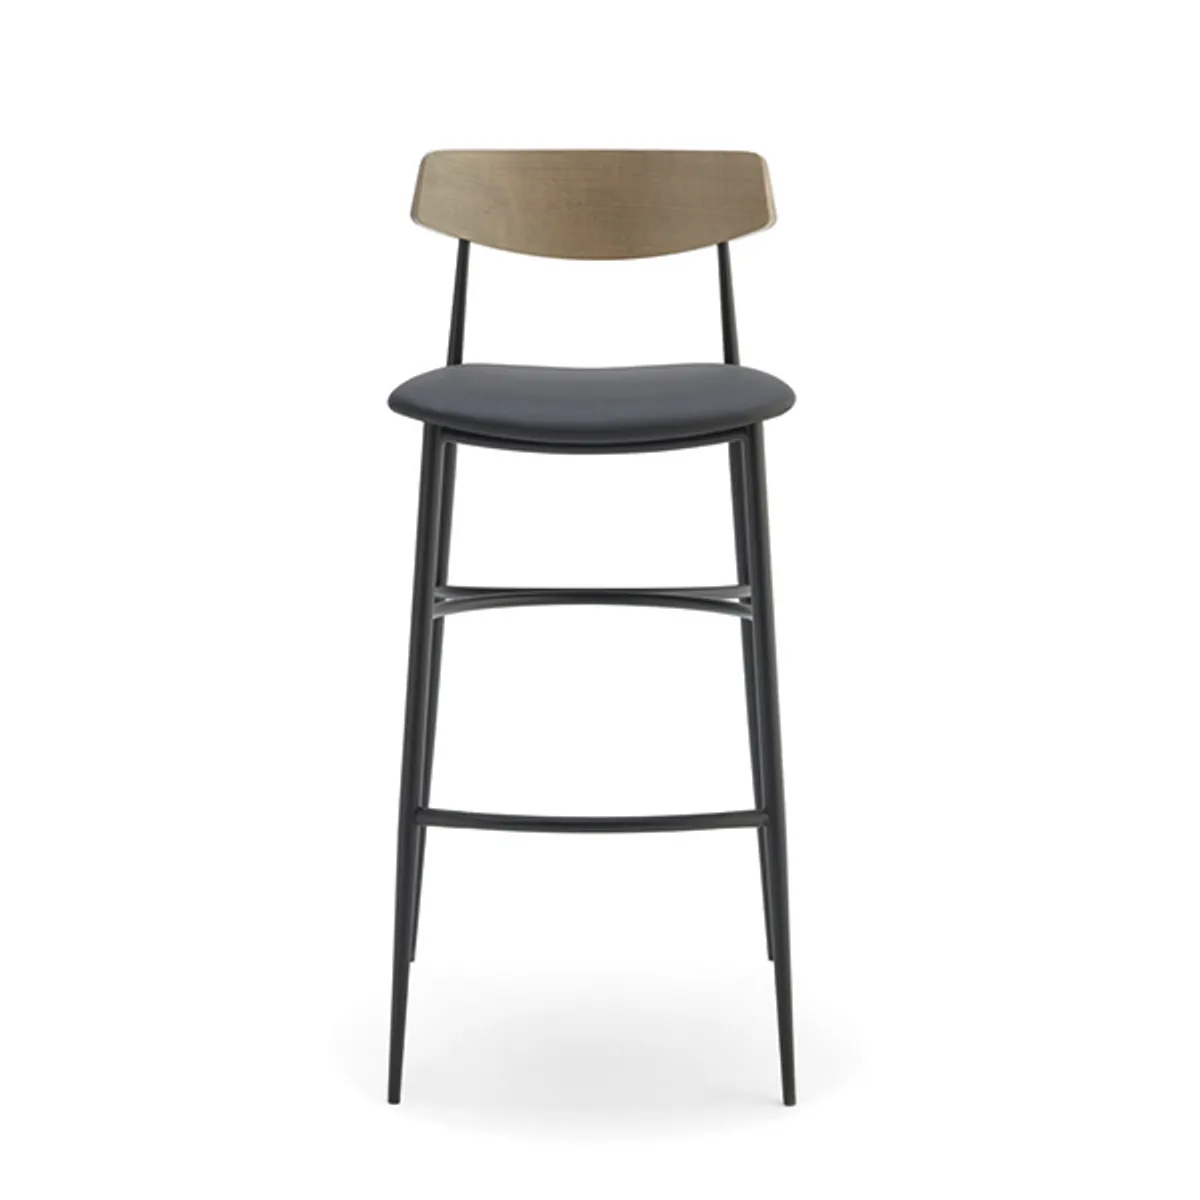 Sydney Bar Stool Inside Out Contracts